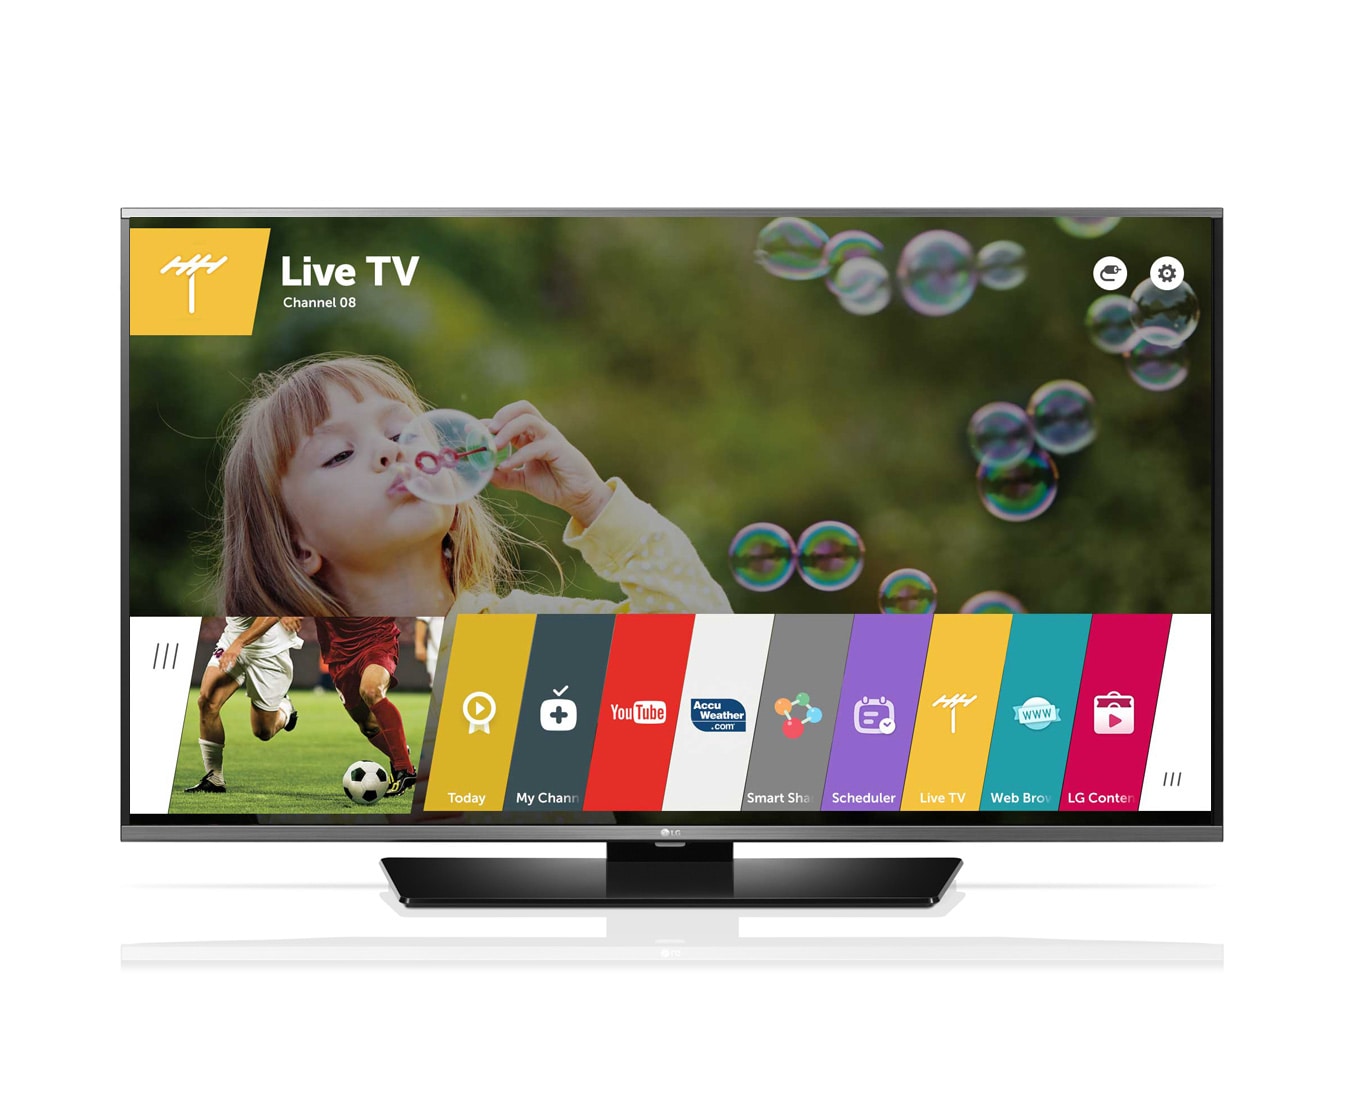 LG Smart TV with webOS 2.0, 40LF6300